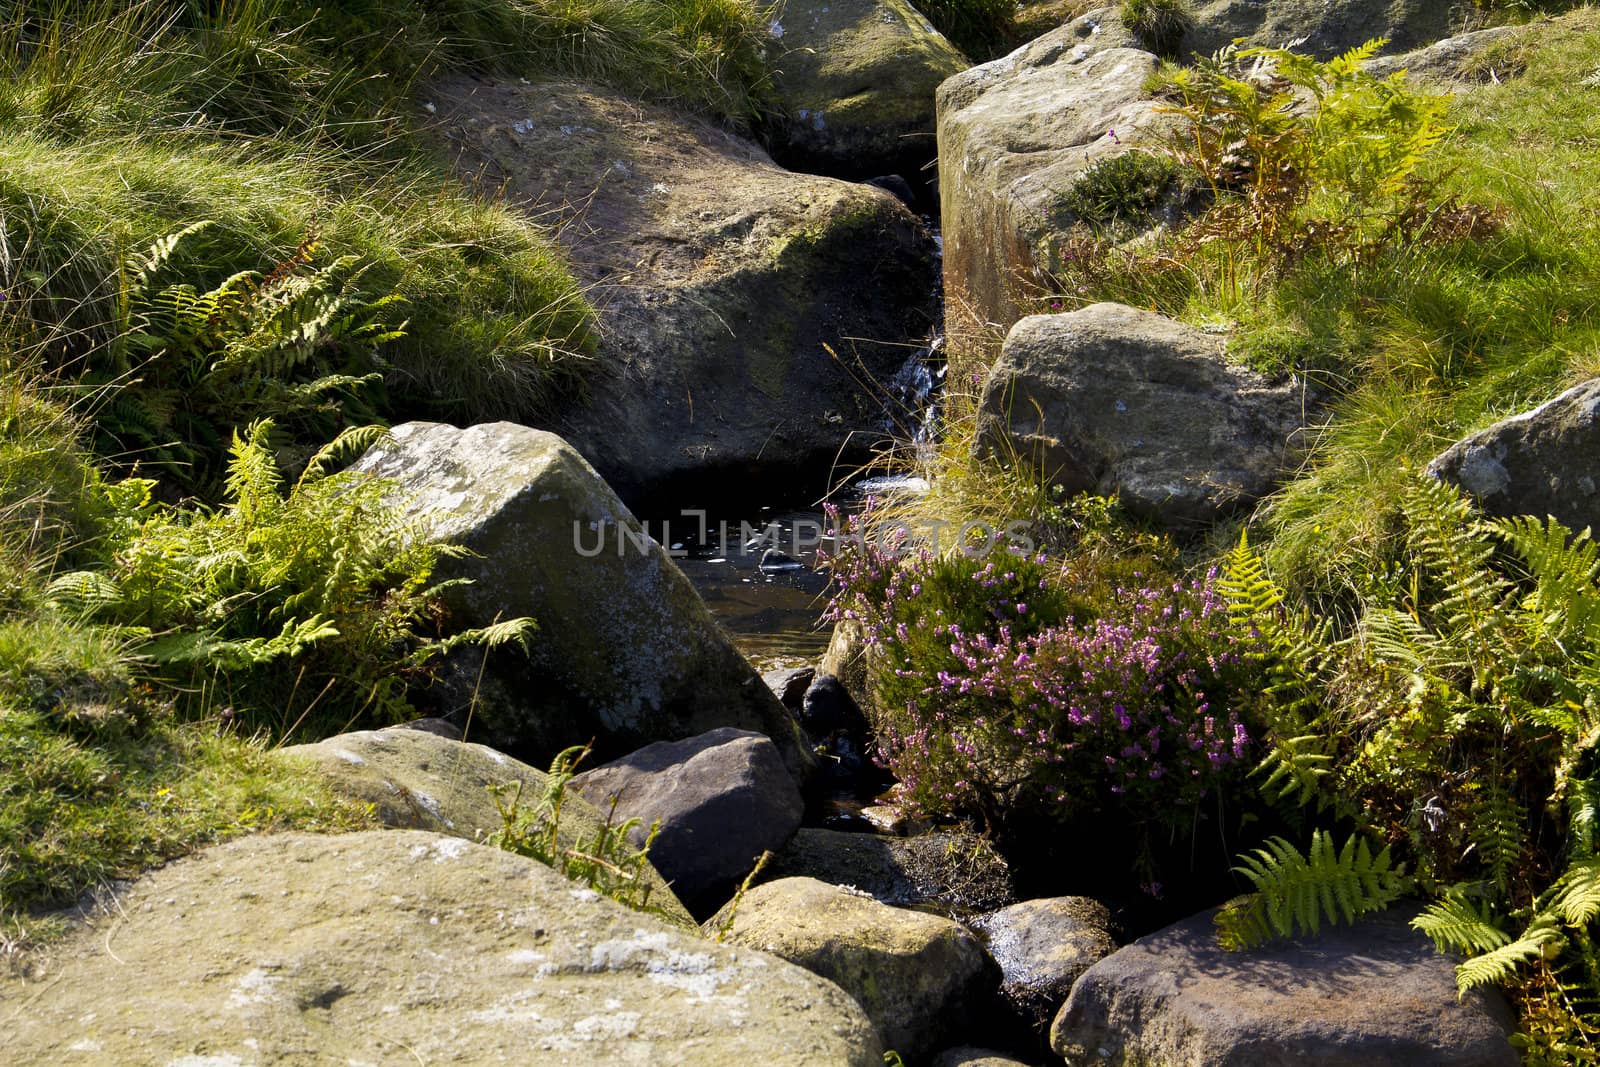 Running from the top of Rombalds Moor this stream merrily meanders through heather covered rocks to the Wharfe.